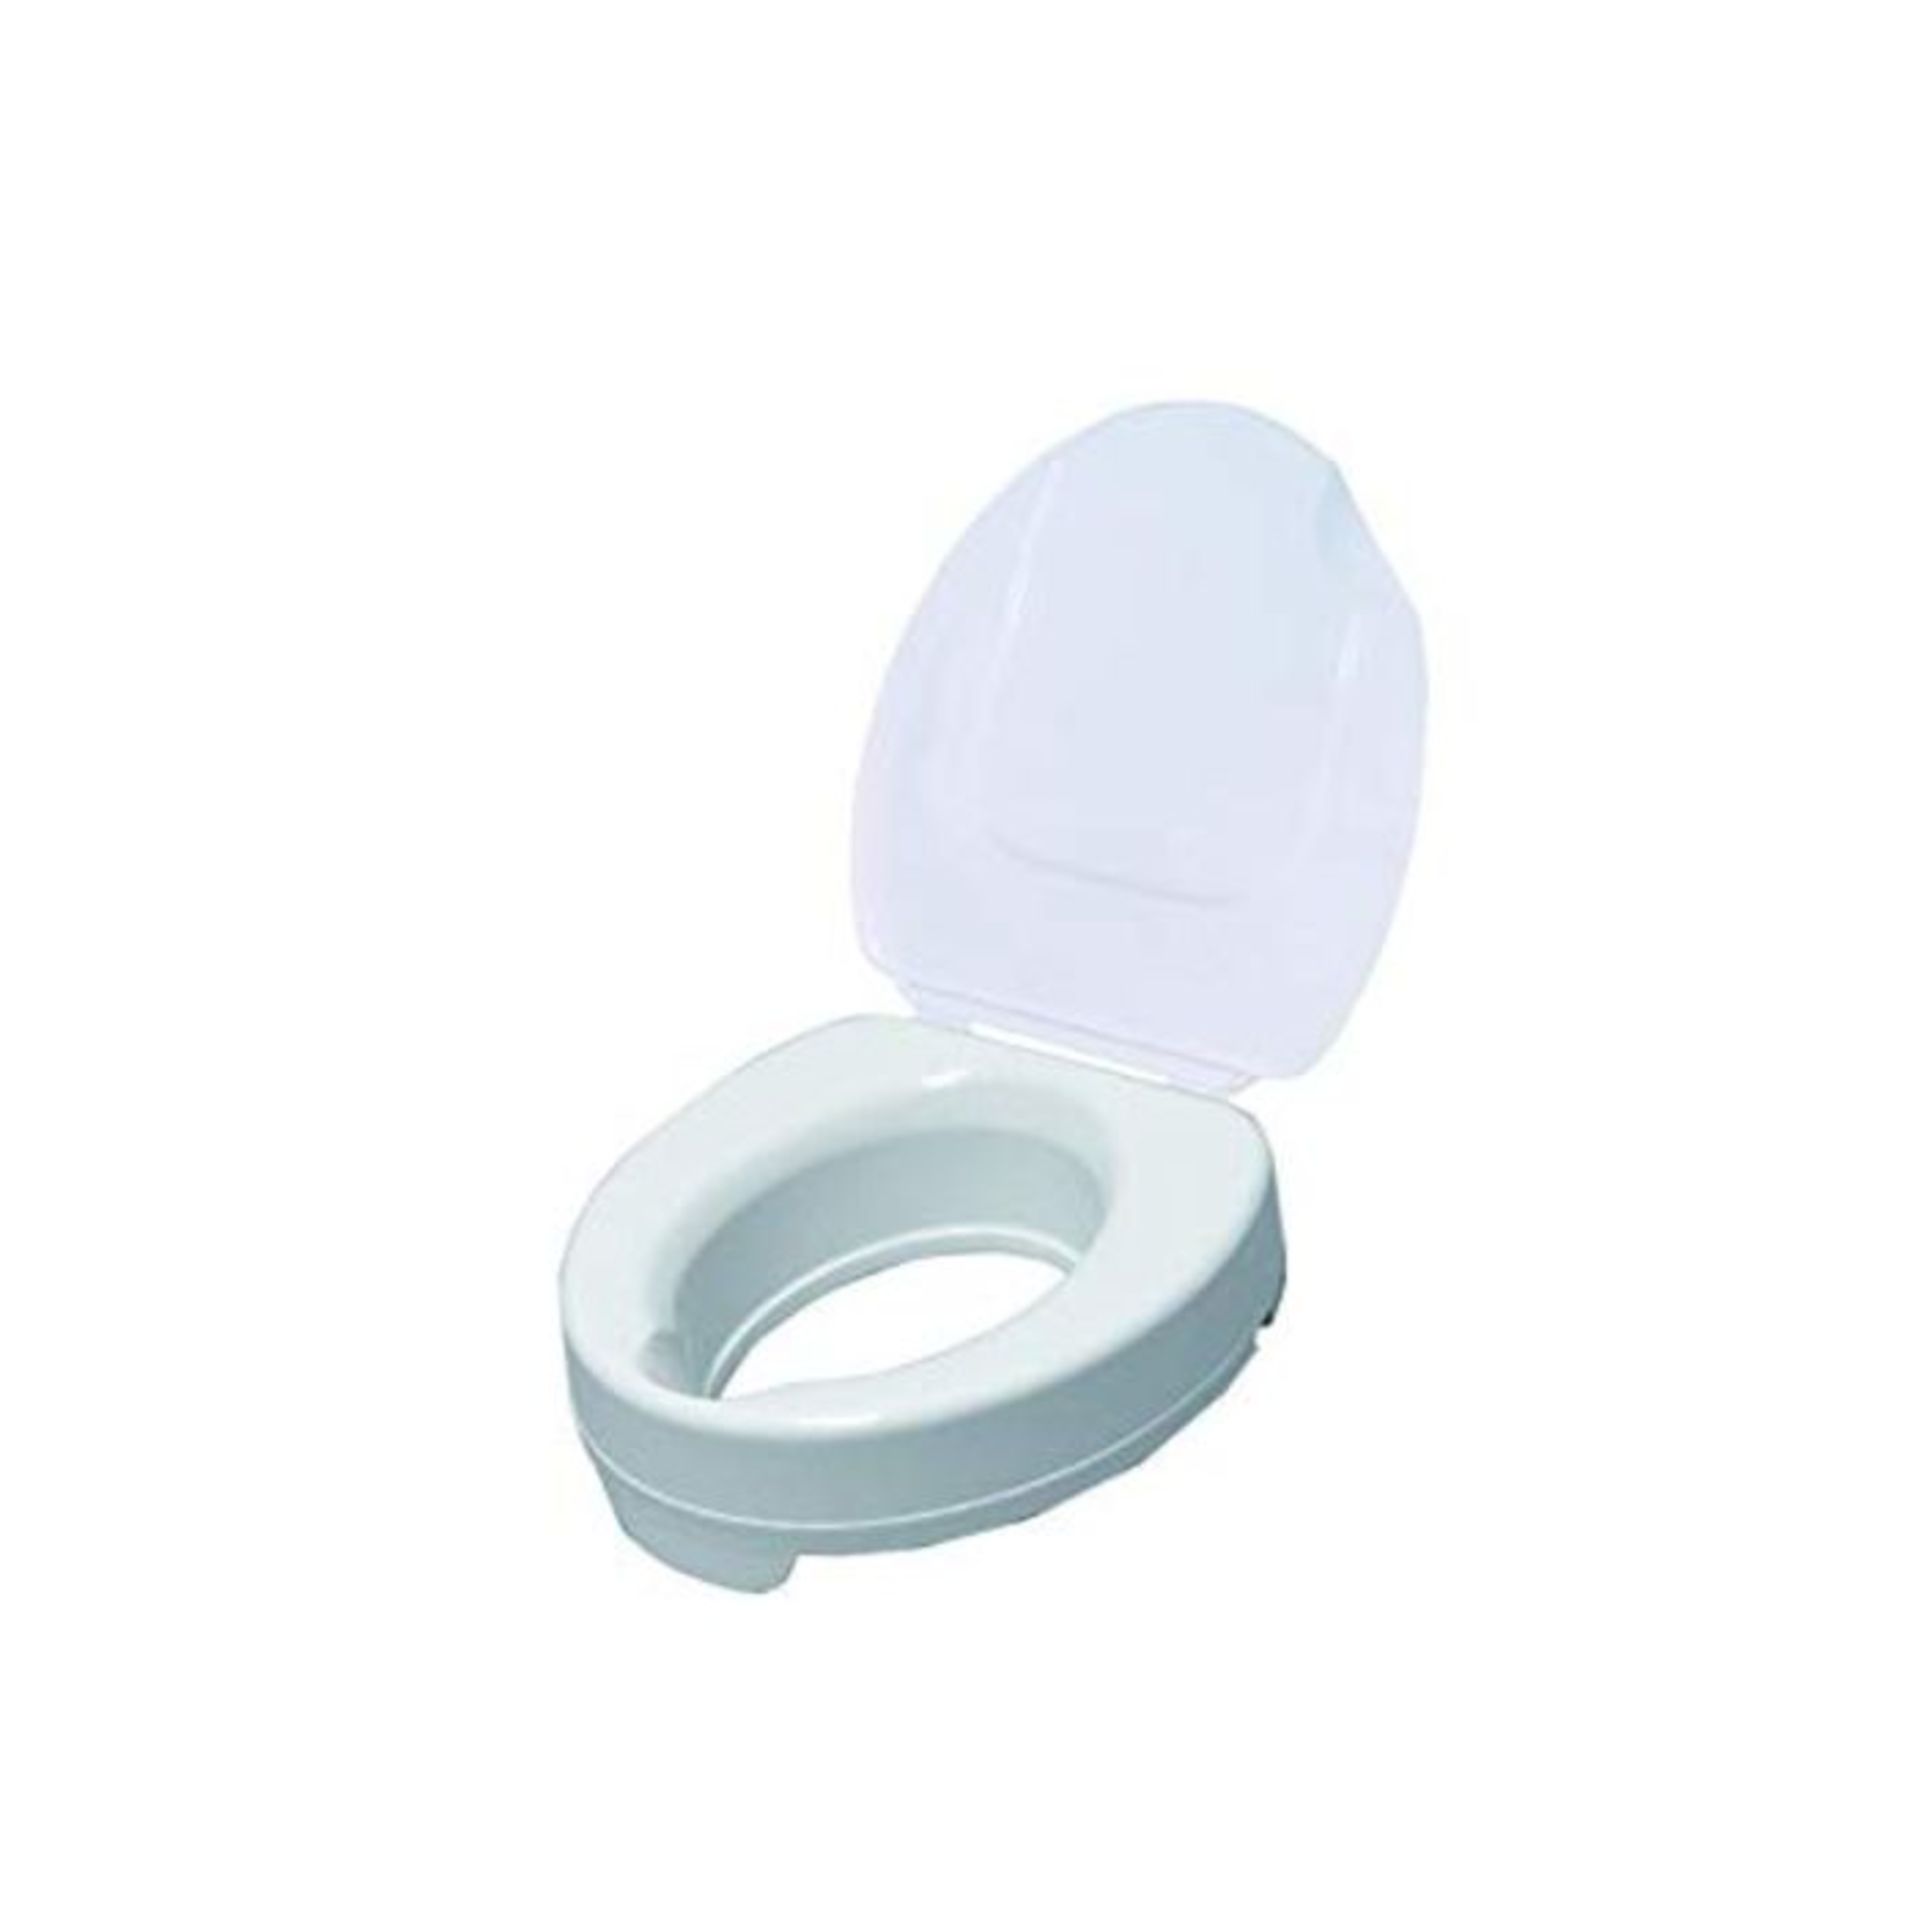 Drive DeVilbiss Healthcare 6 -Inch Raised Toilet Seat with Lid, White